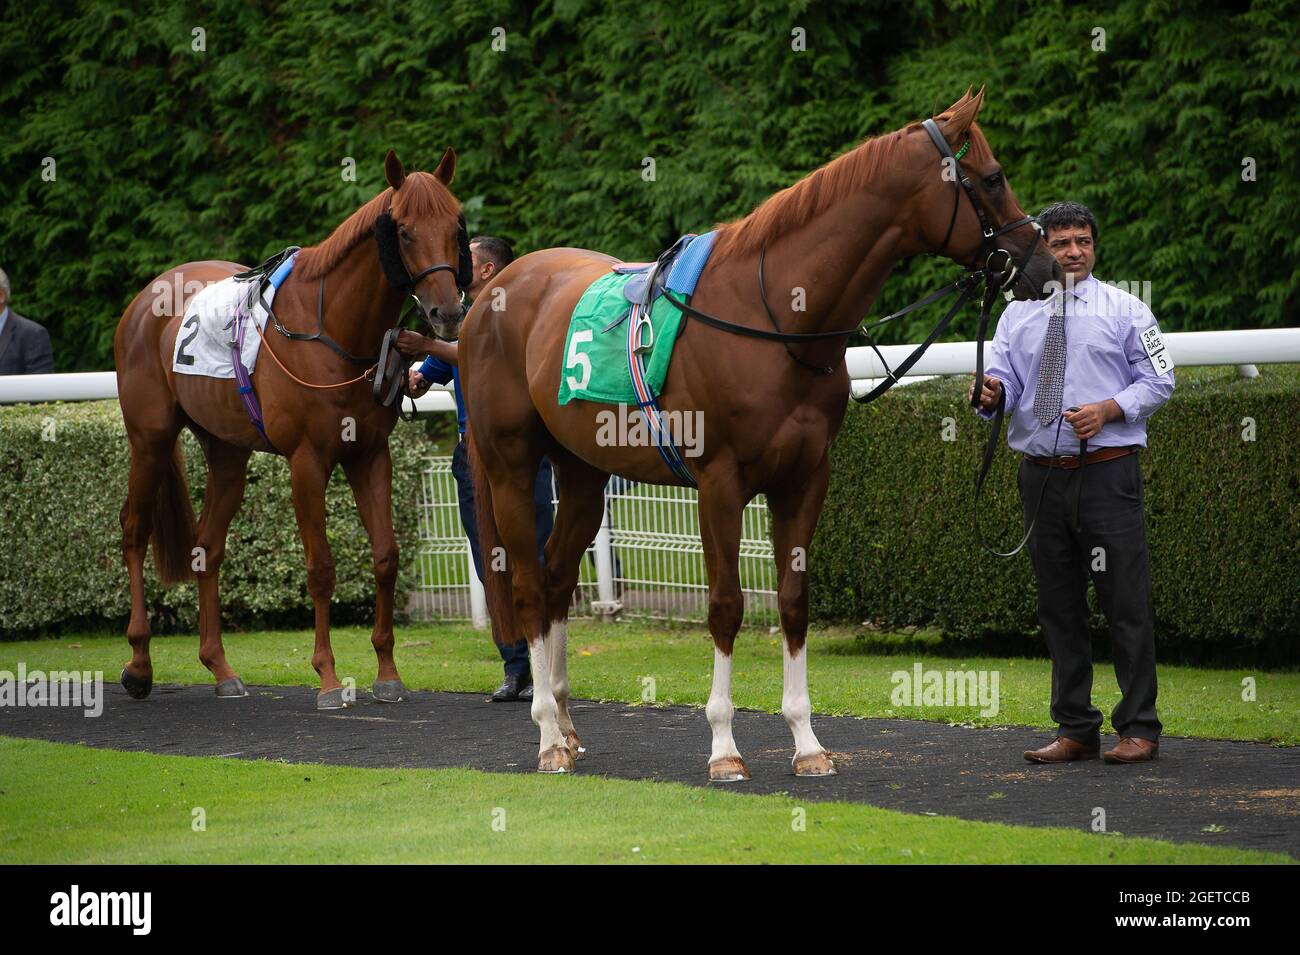 Sunbury-on-Thames, Middlesex, Uk. 20th August, 2021. Emblem Empire and  Mo'Assess in the Parade Ring before the Unibet New Instant Roulette Novice  Stakes (Class 5). Credit: Maureen McLean/Alamy Stock Photo - Alamy